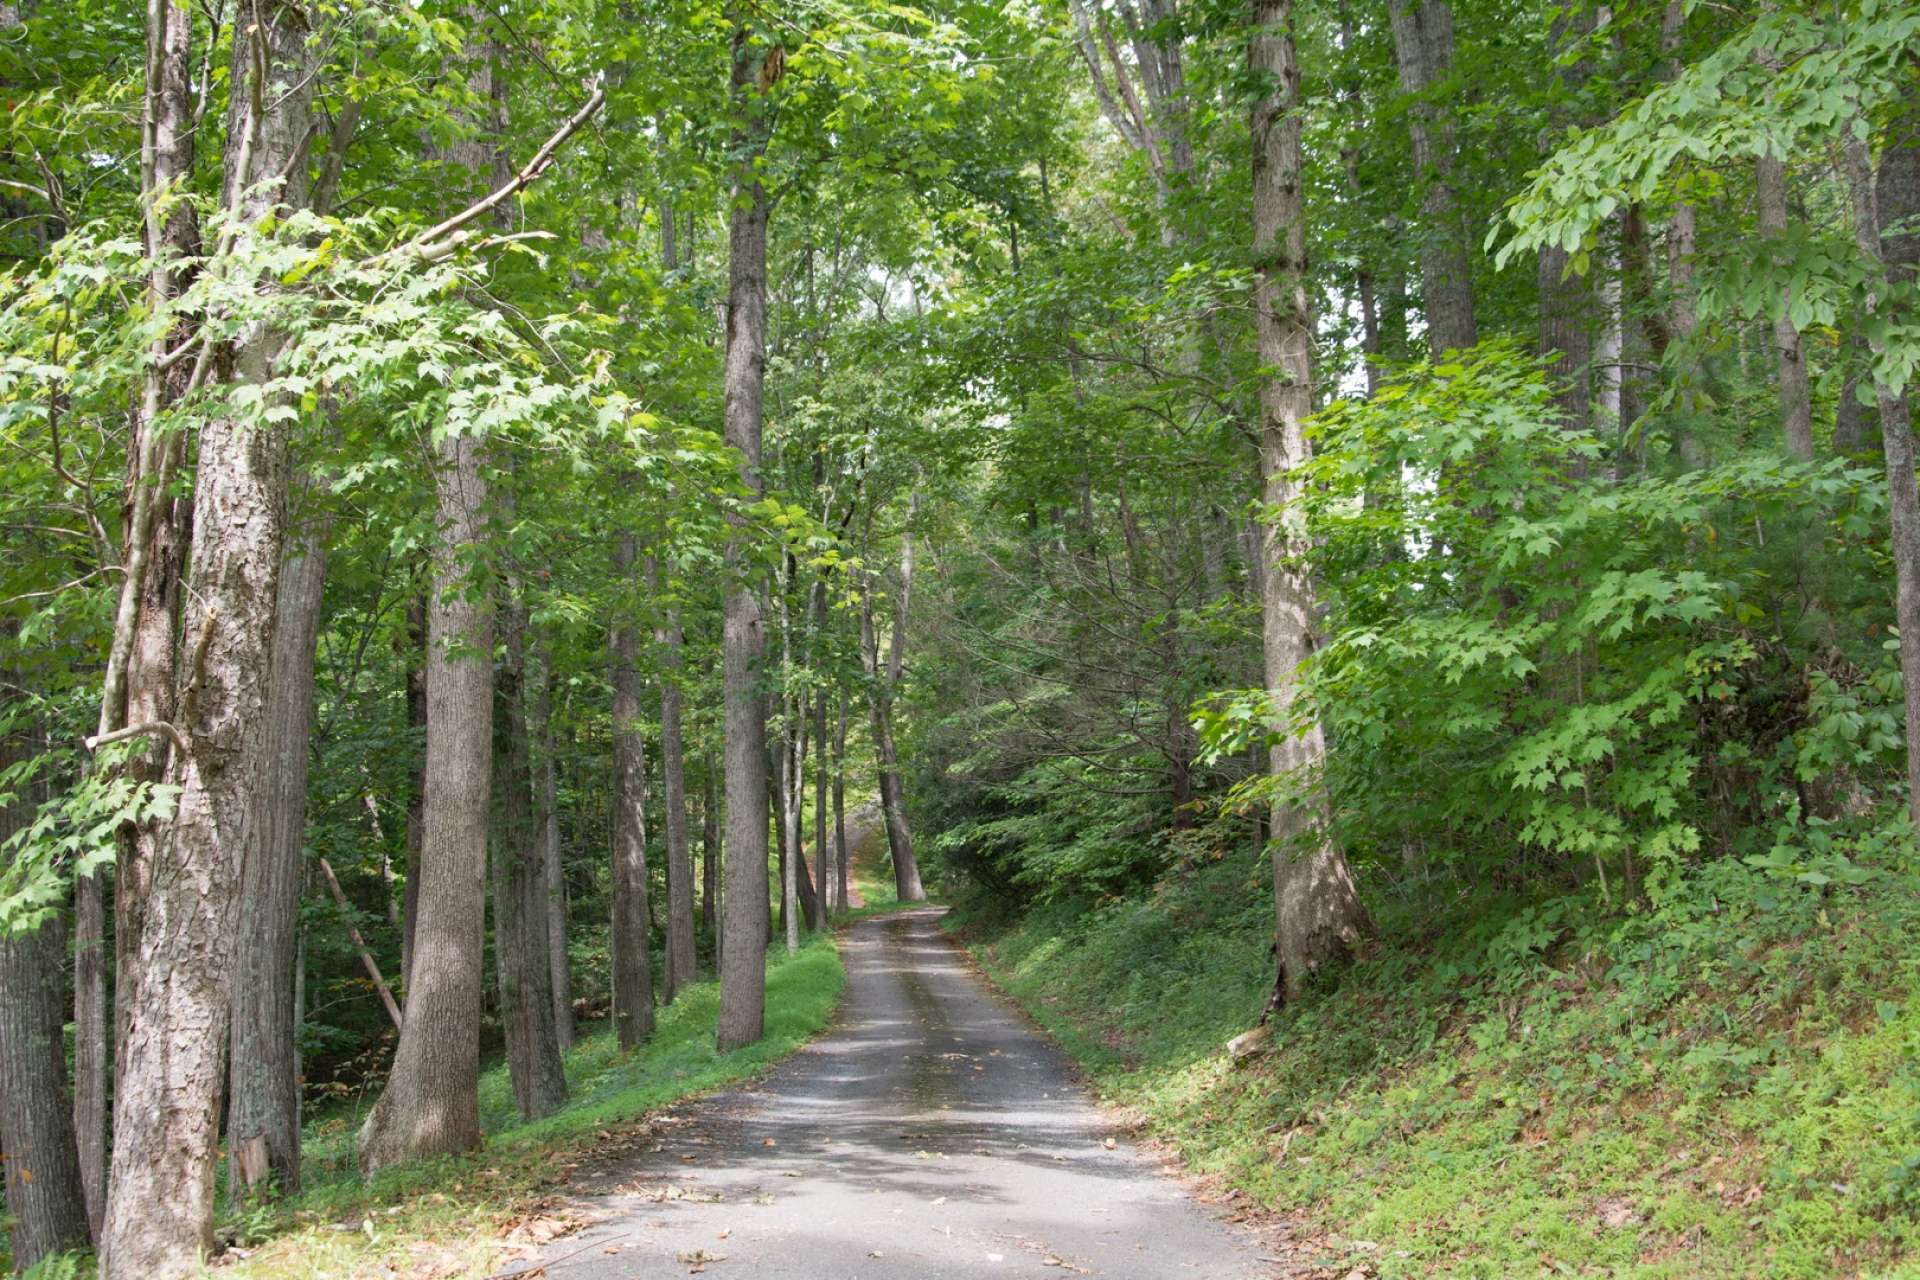 A paved drive canopied by native hardwoods and mountain foliage winds its way up to your private mountaintop estate where you can experience leisurely mountain living.